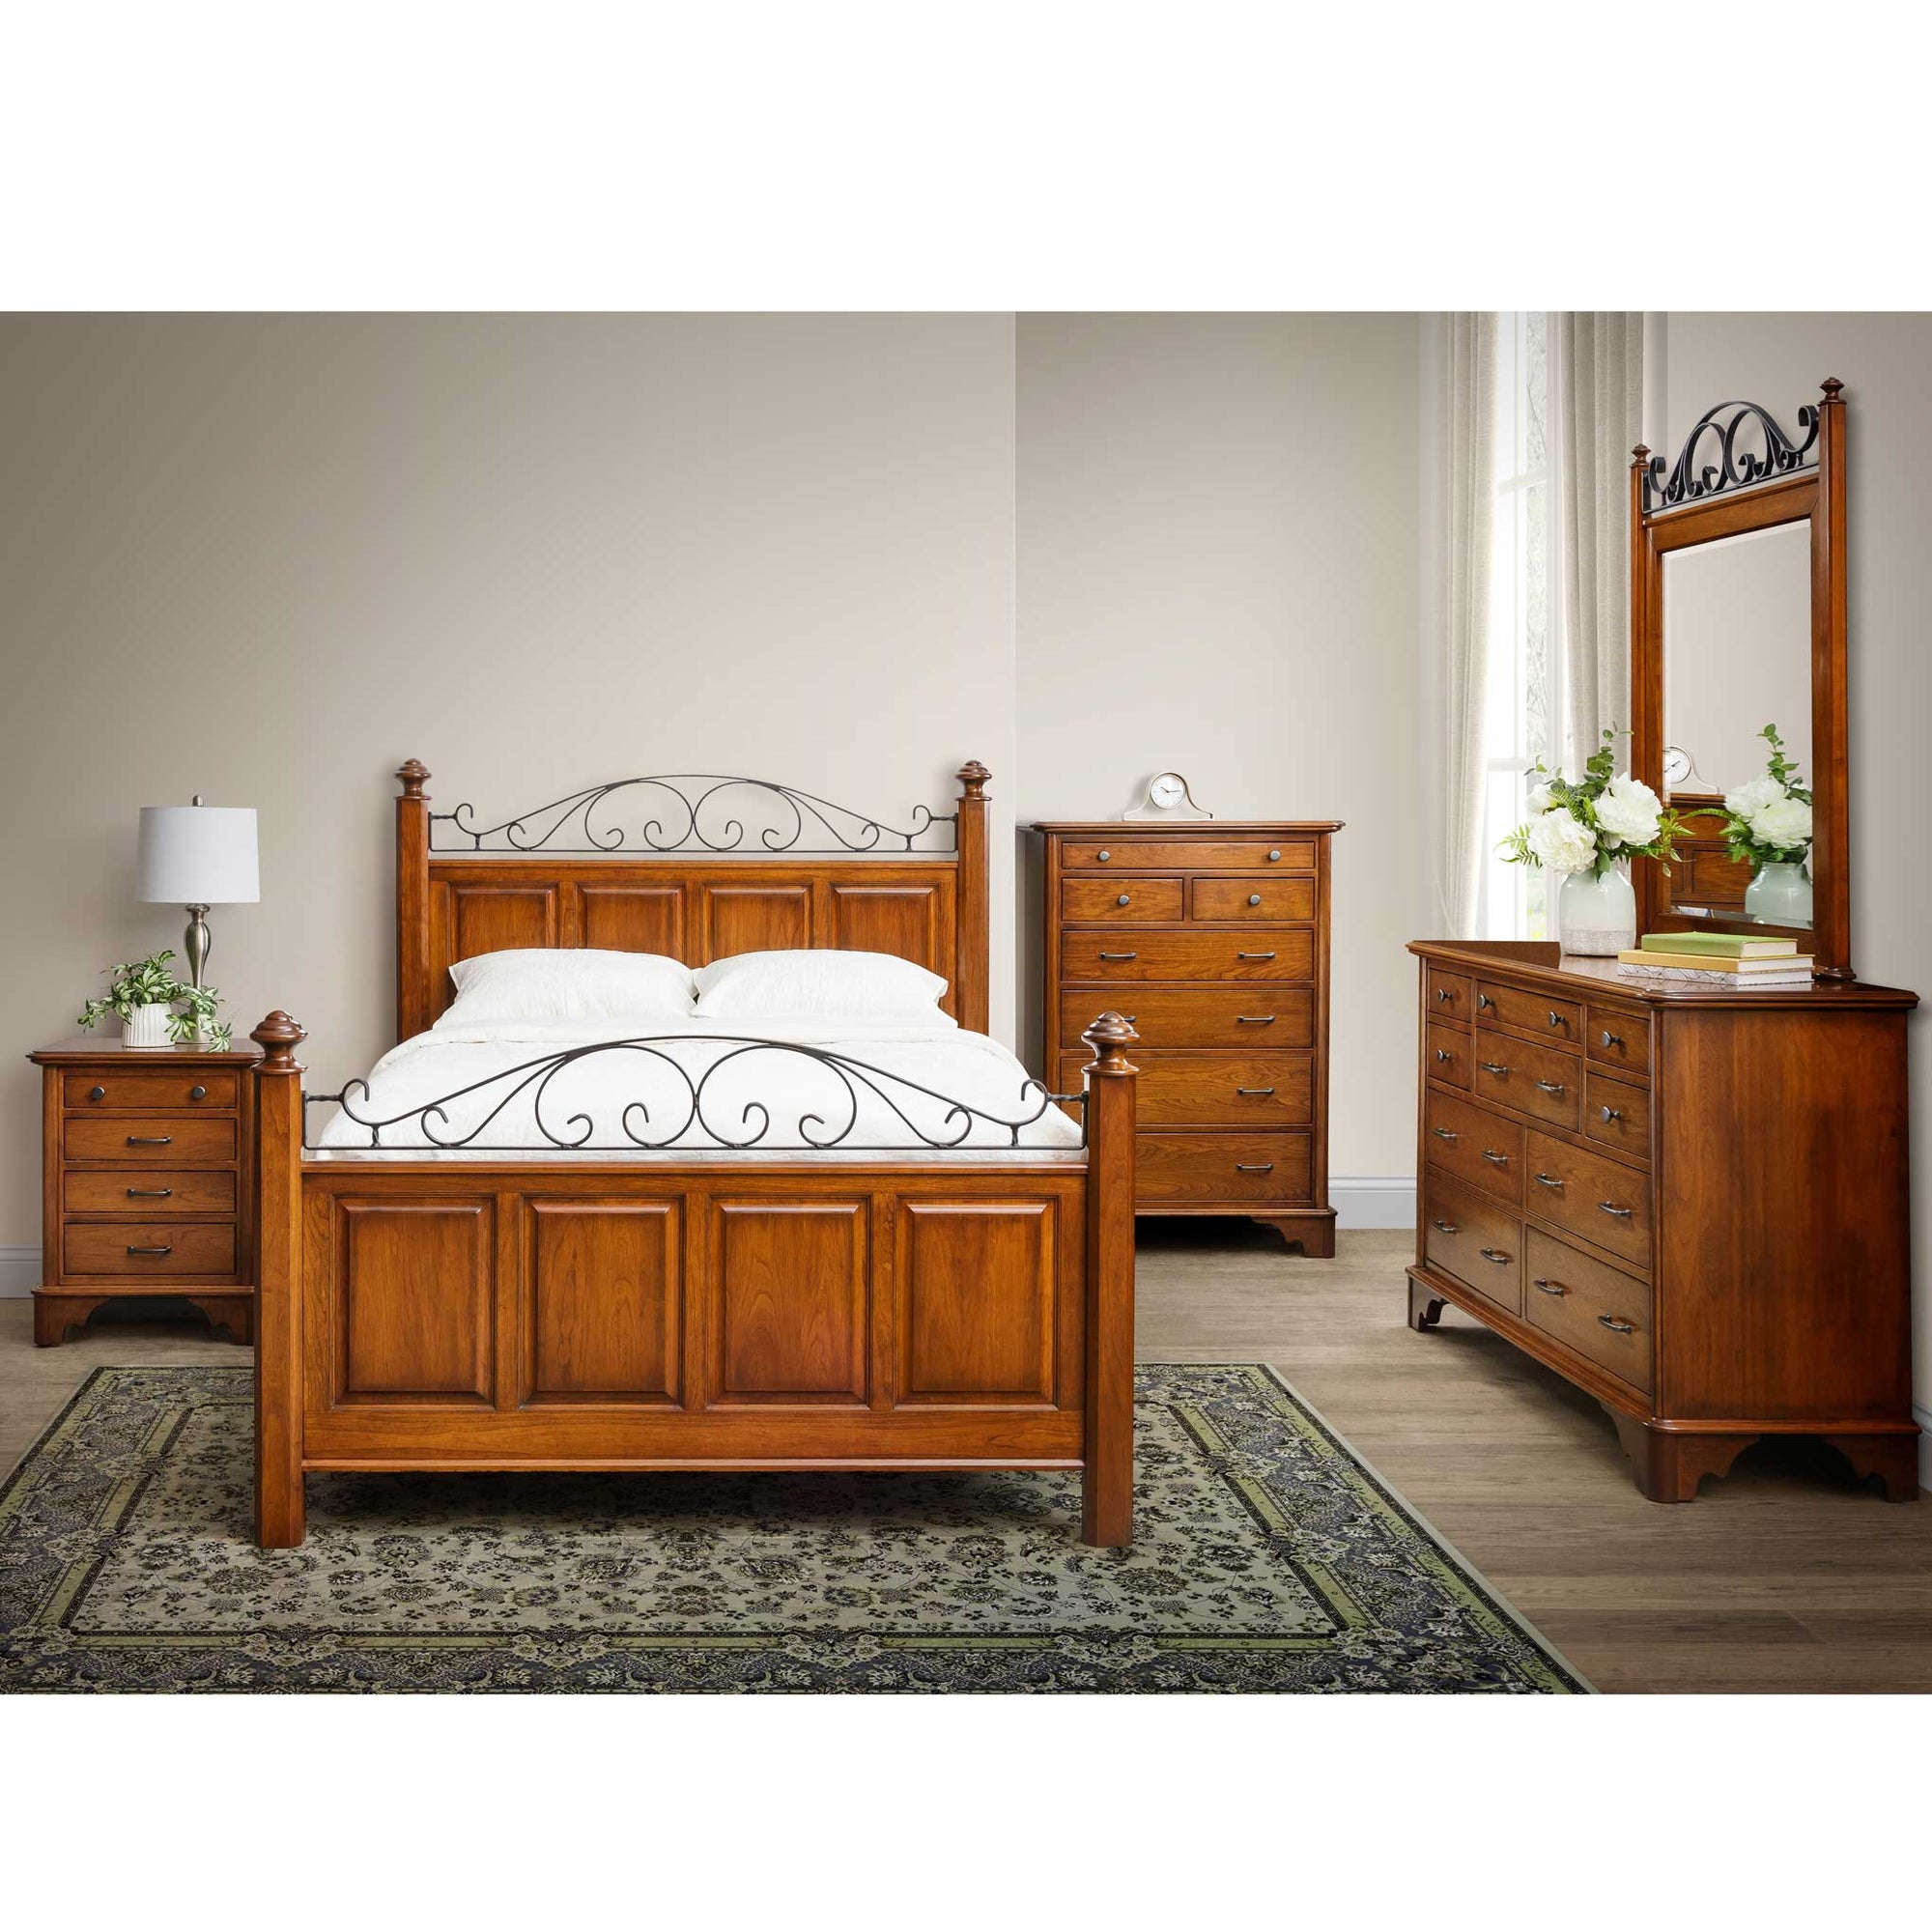 Amish Wellington 5pc Iron Scroll Queen Cherry Bedroom Set - snyders.furniture